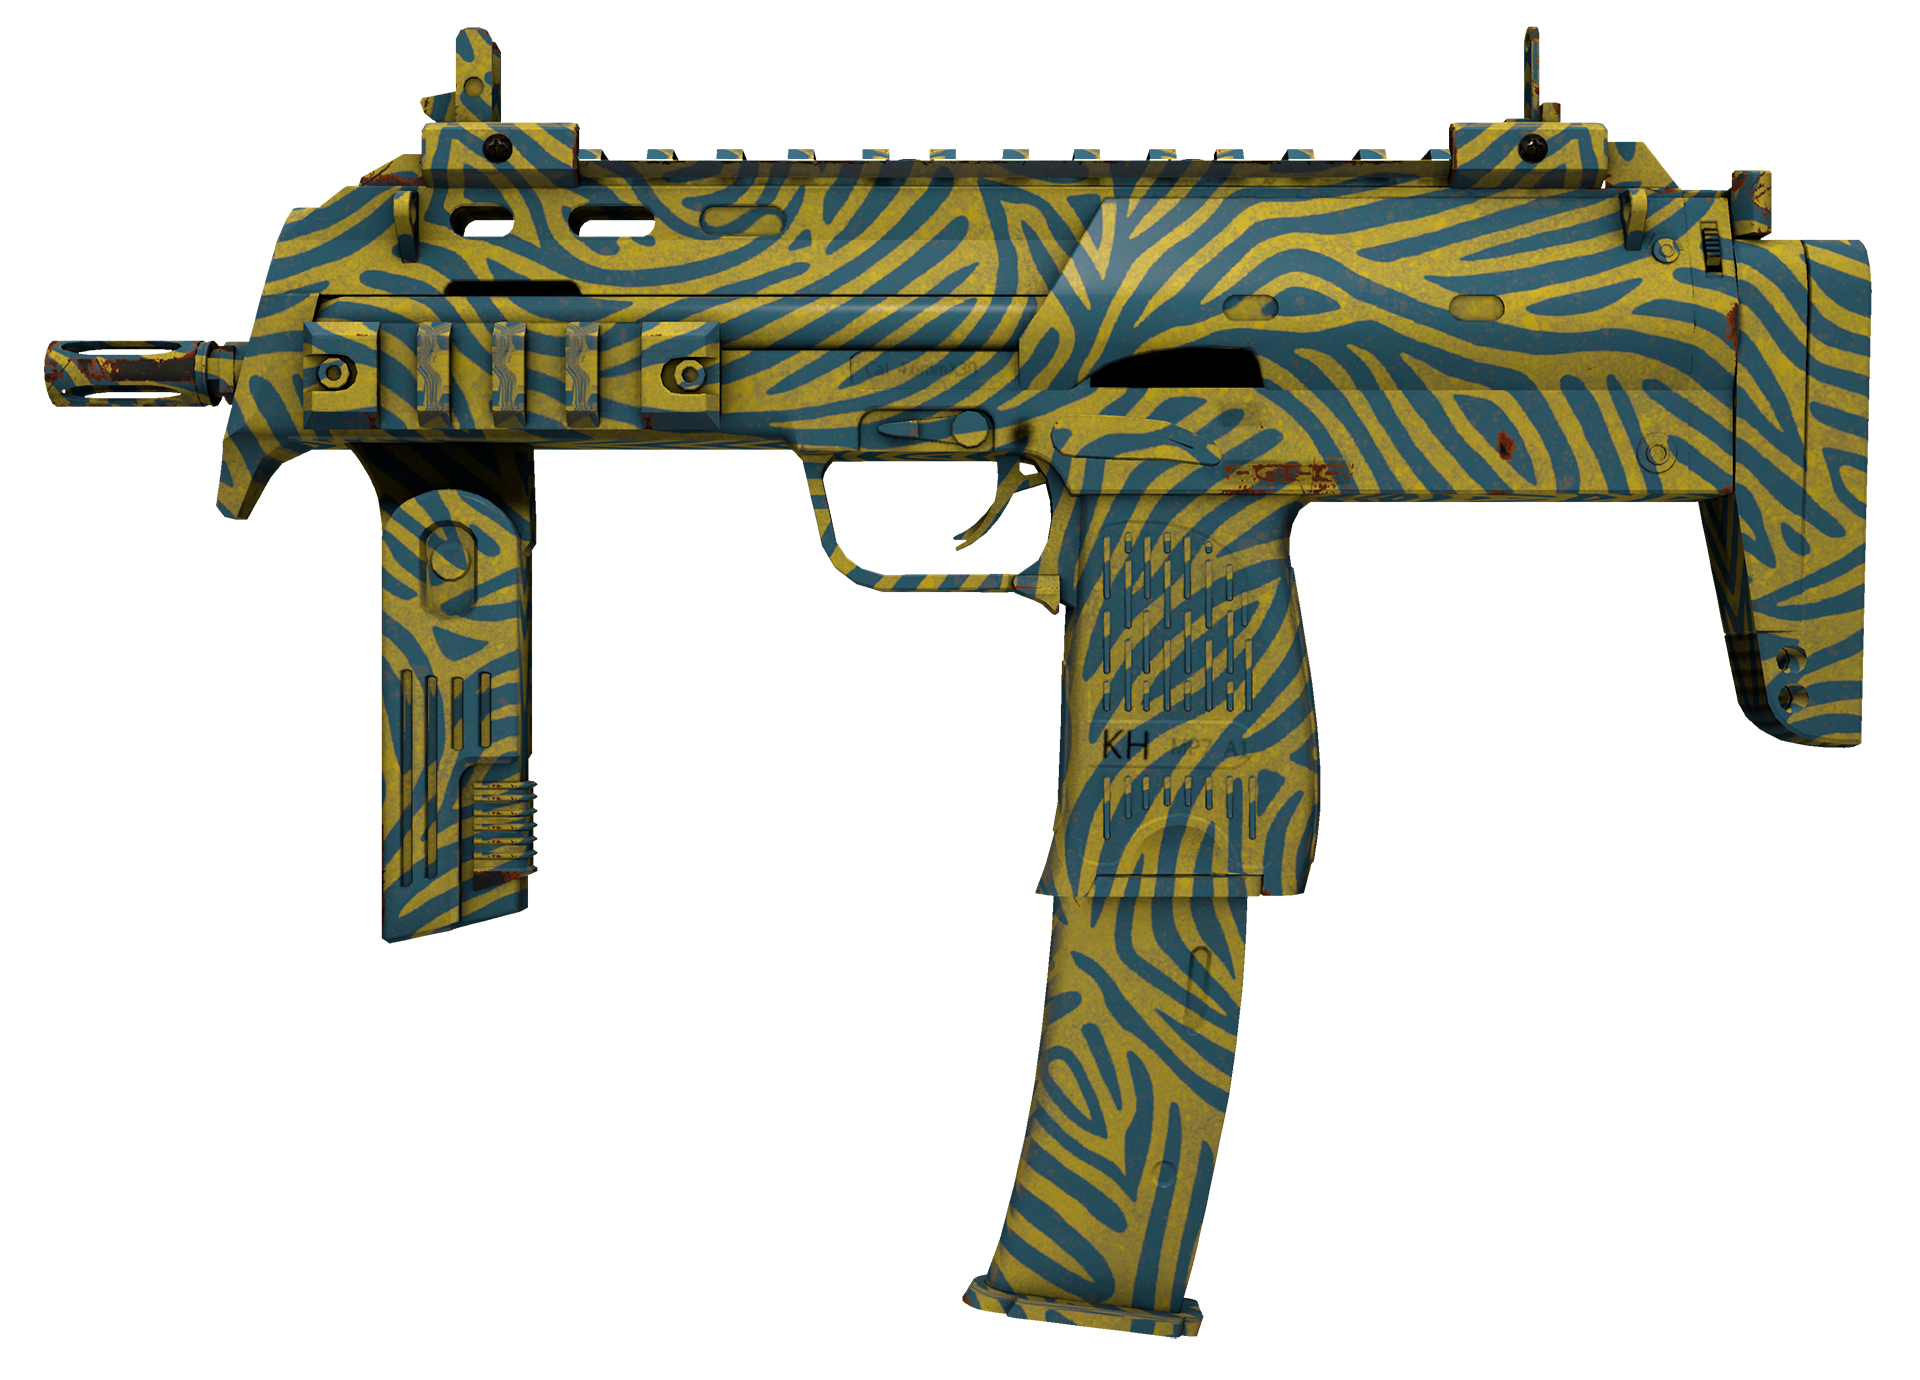 free for mac download MP7 Motherboard cs go skin